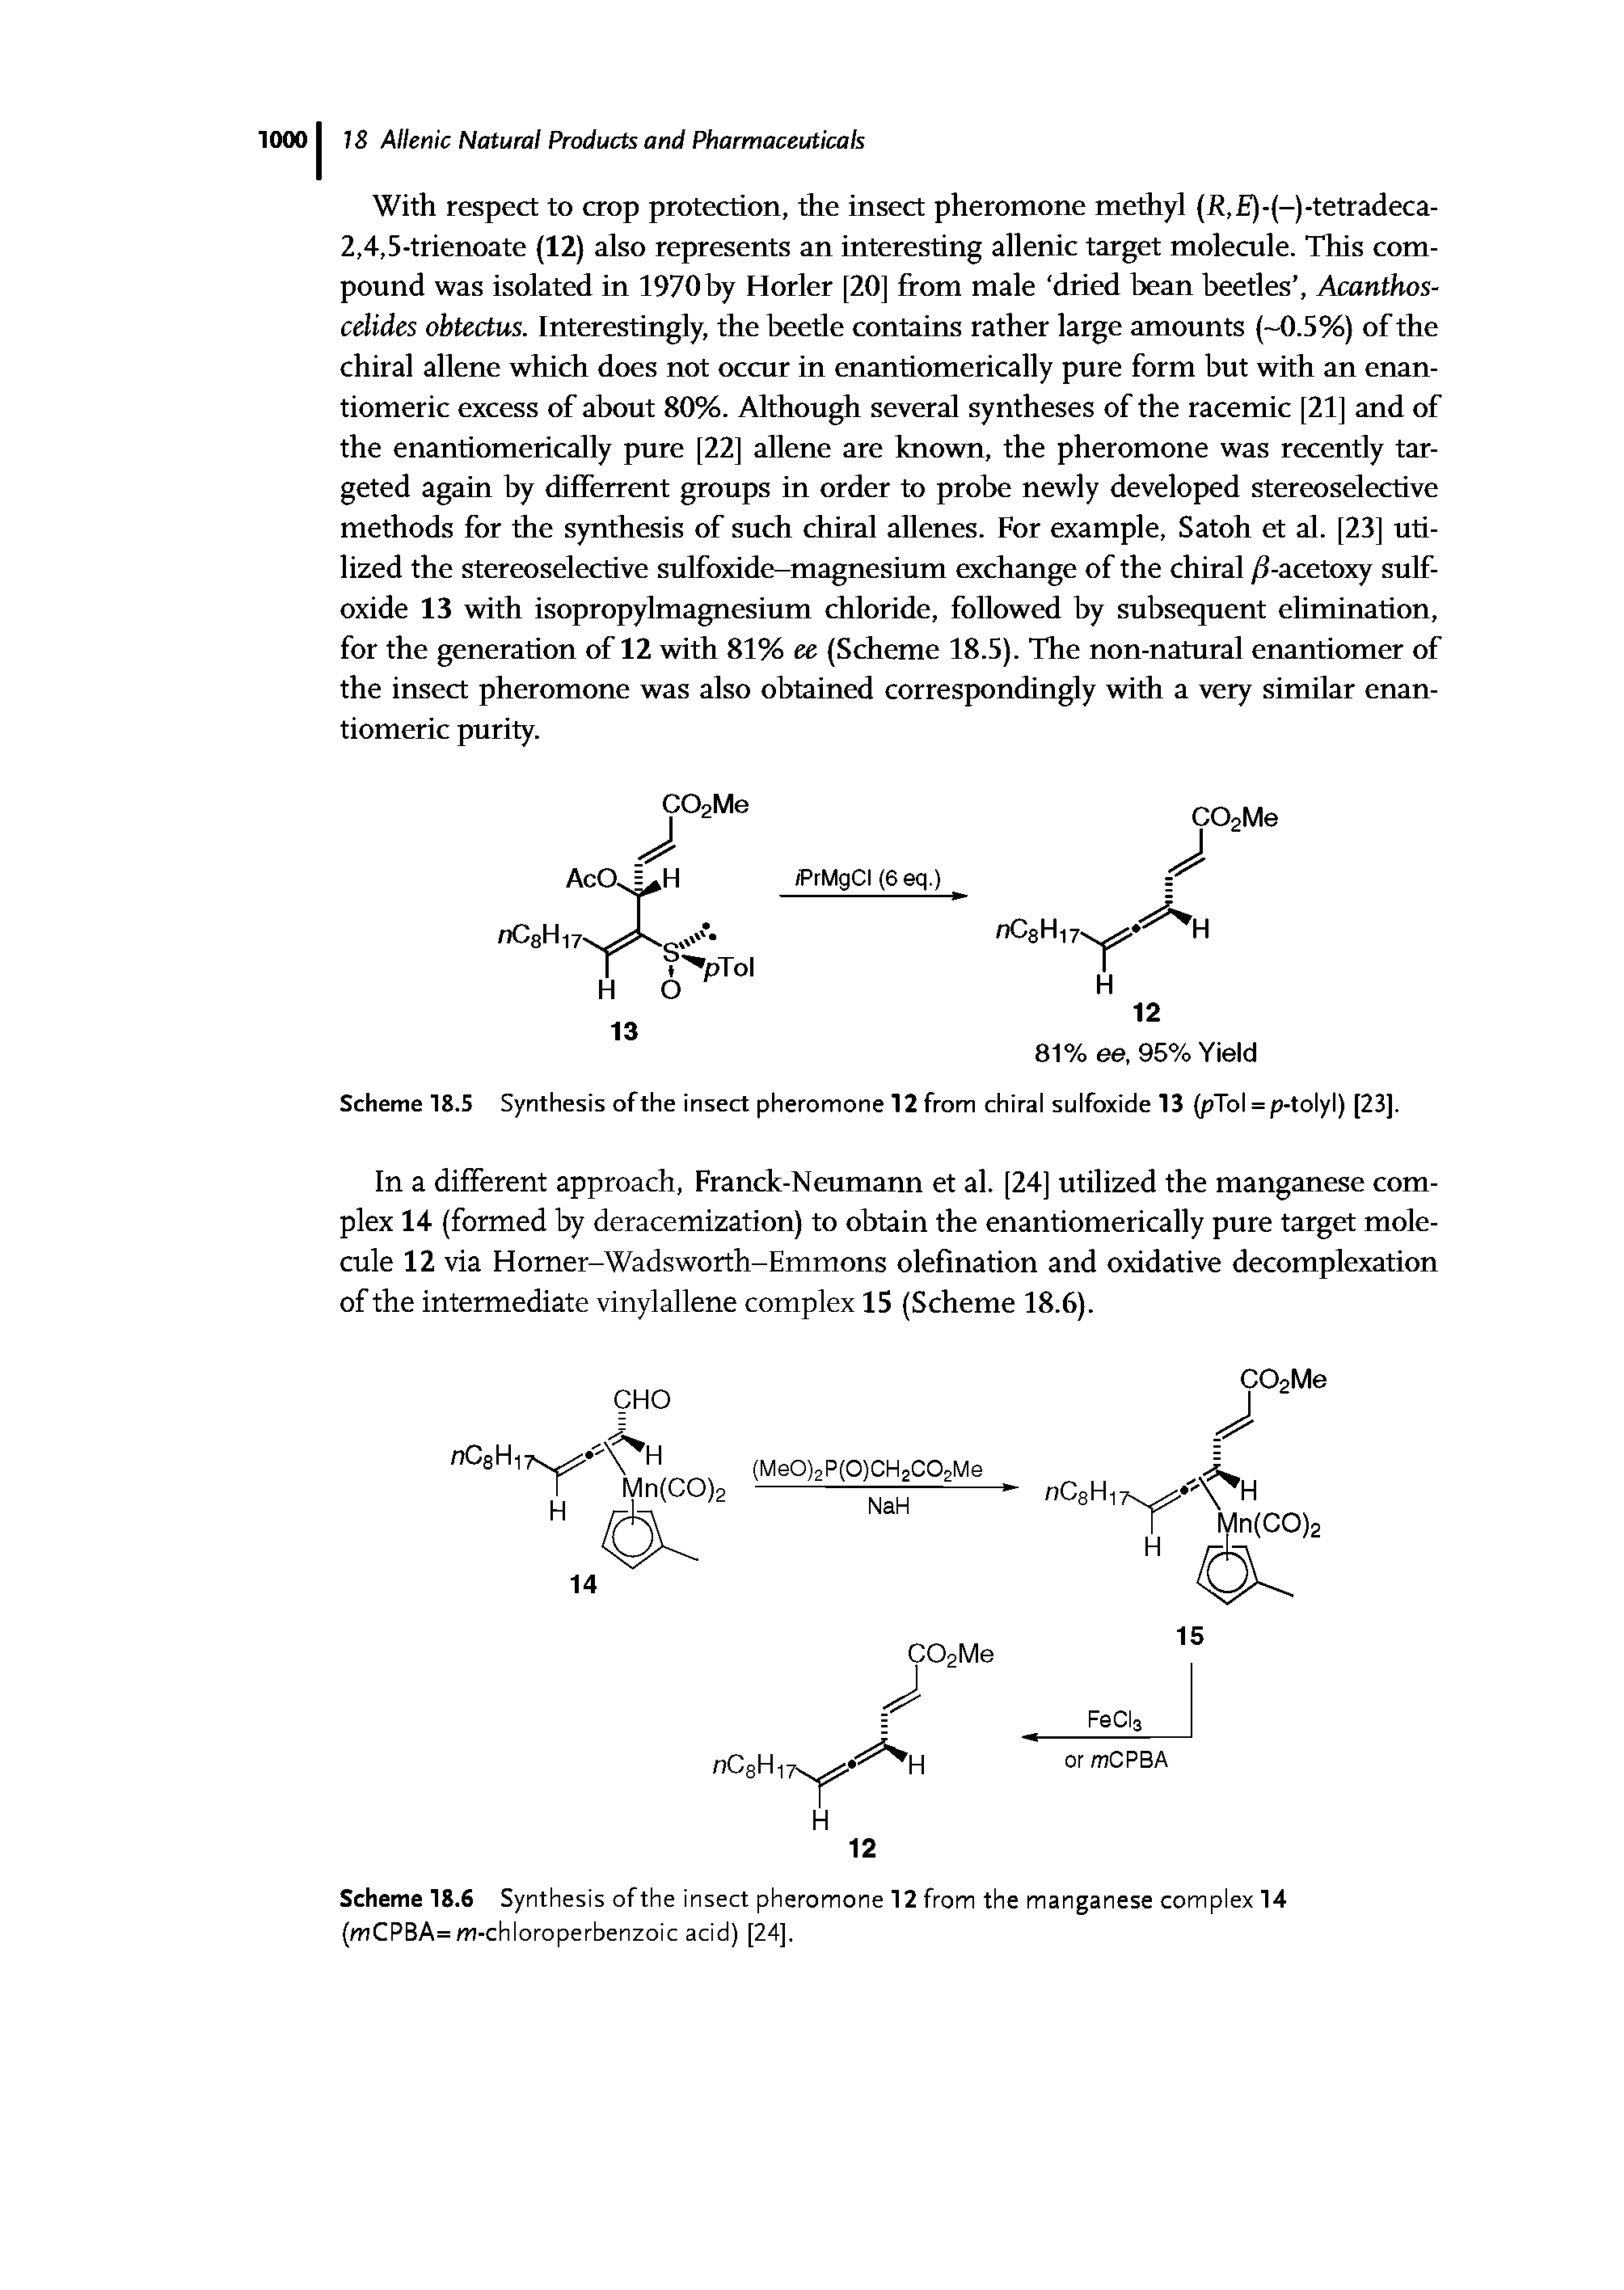 Scheme 18.6 Synthesis ofthe insect pheromone 12 from the manganese complex 14 (mCPBA=m-chloroperbenzoic acid) [24],...